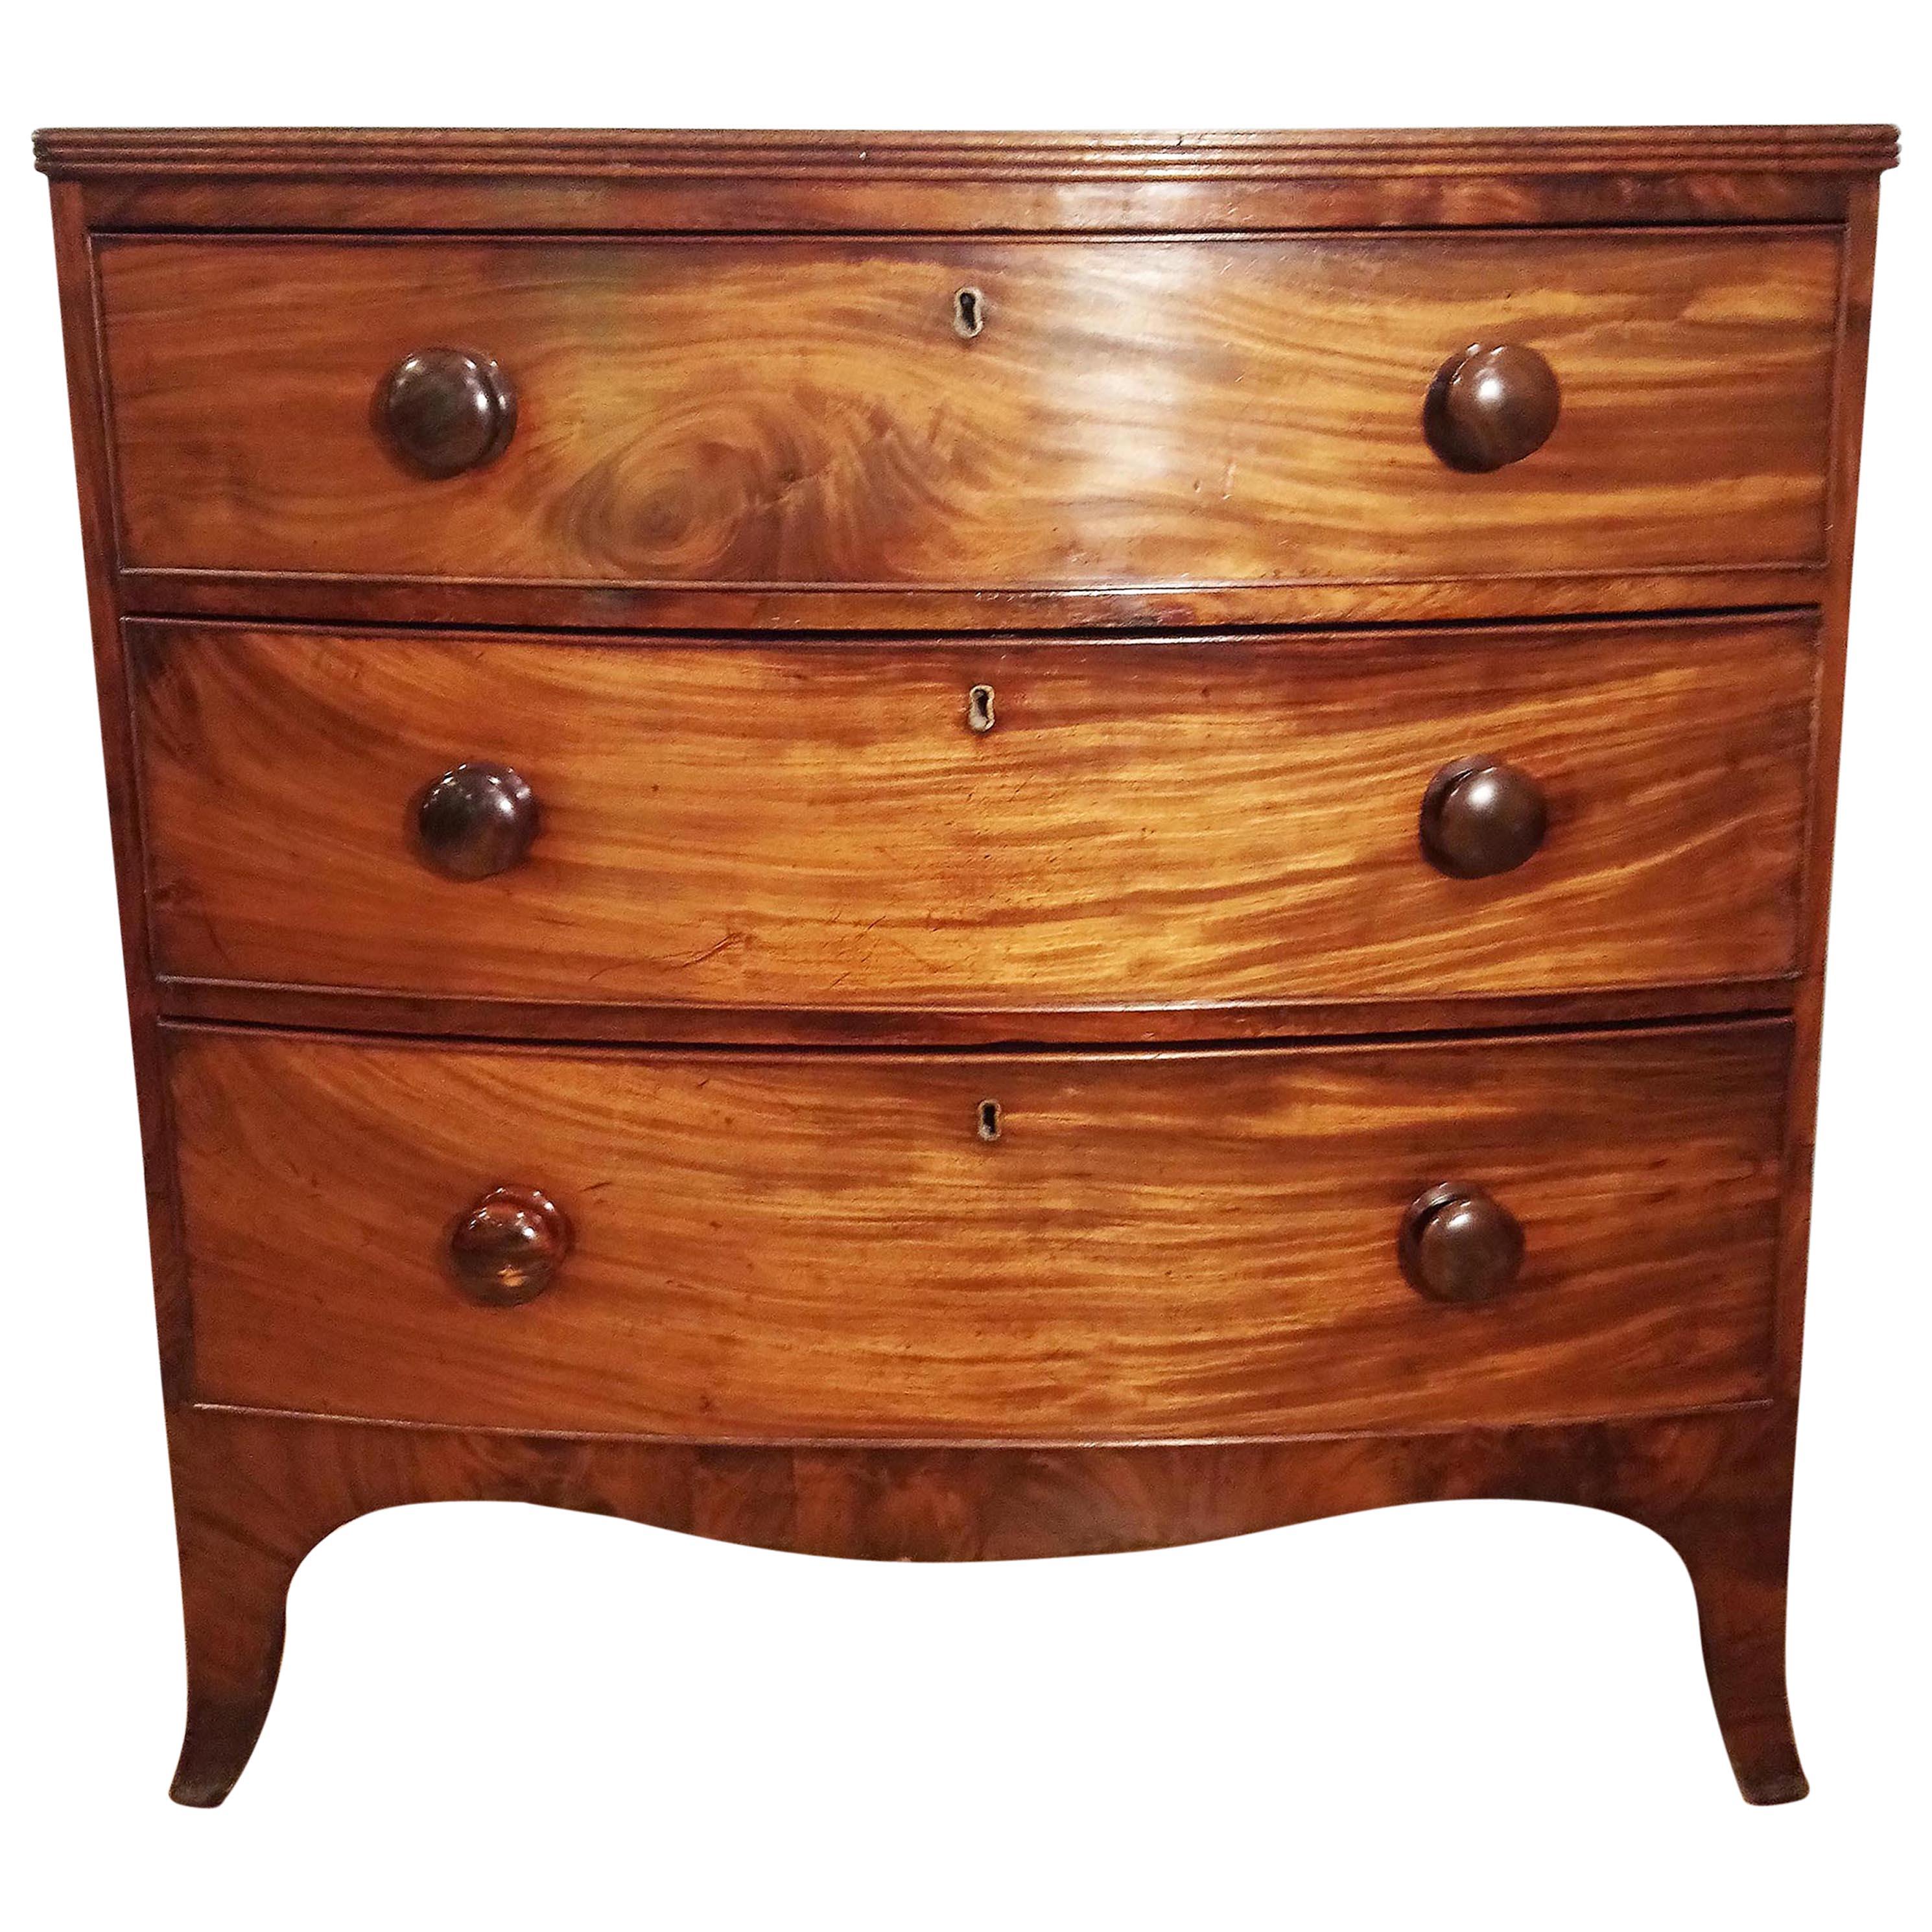 19th Century Mahogany Bow Fronted Chest of Drawers